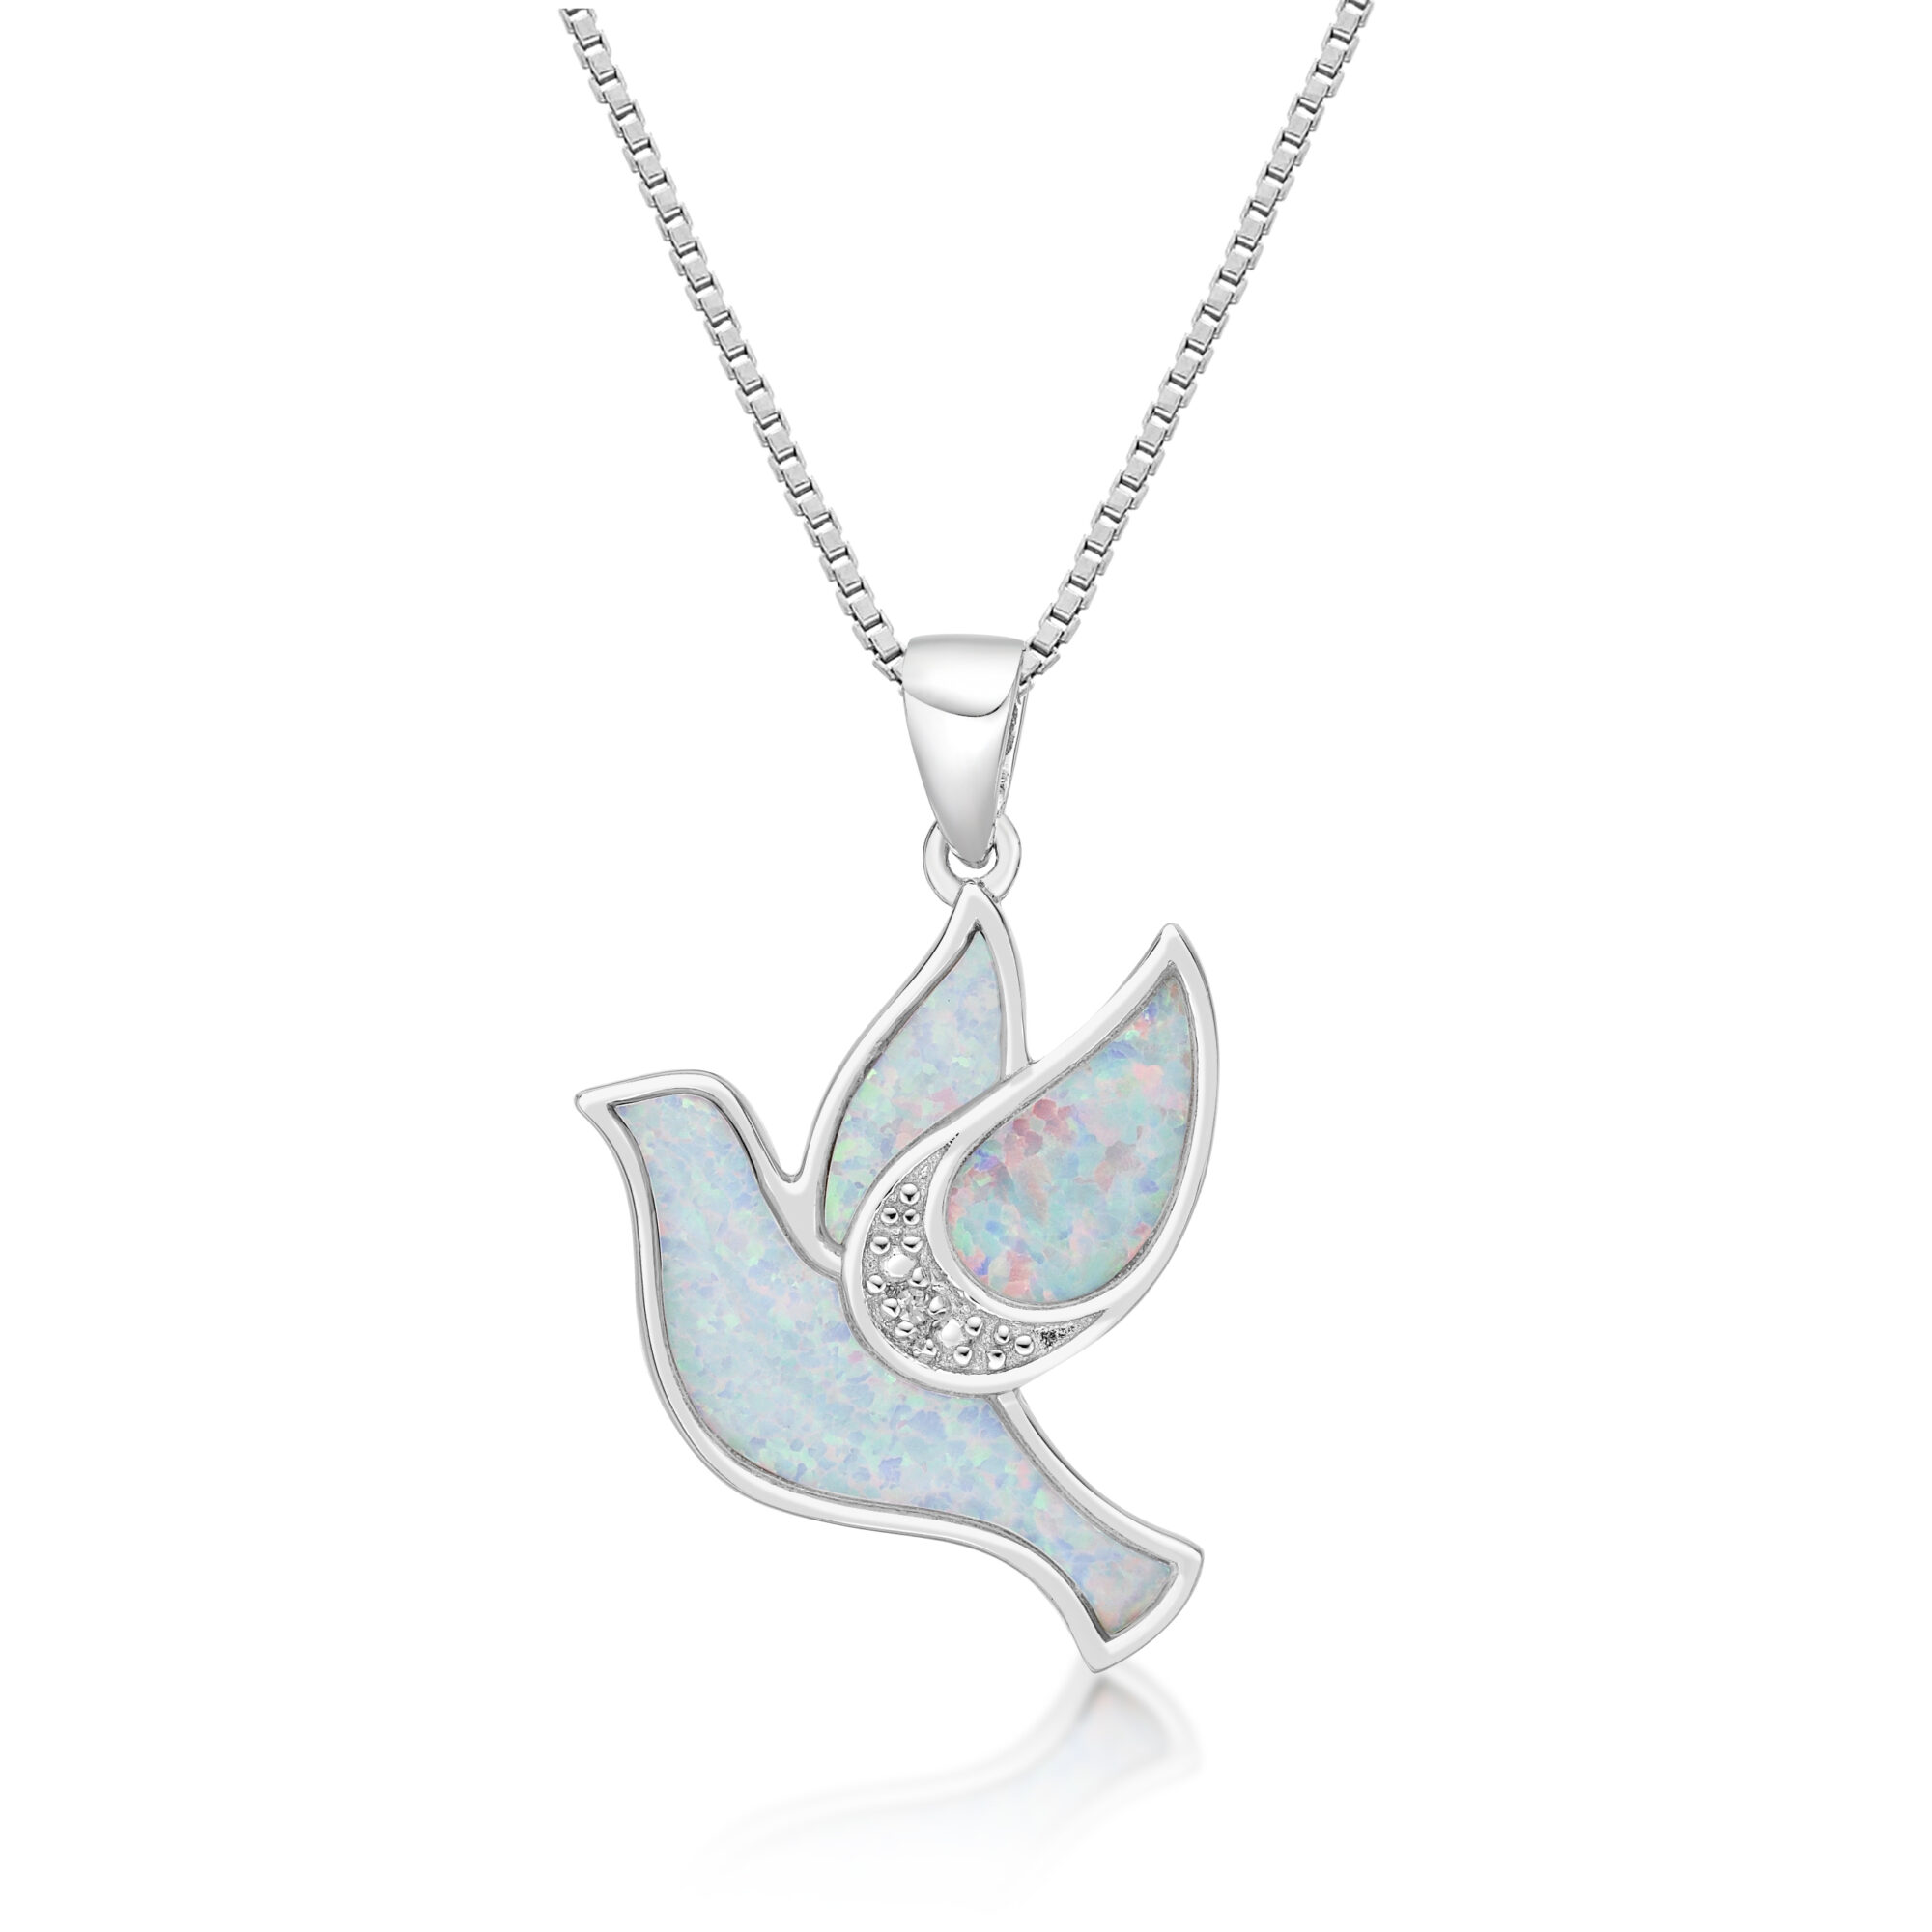 Lavari Jewelers Women’s Created White Opal Dove Diamond Pendant with Lobster Clasp, Sterling Silver, .004 Cttw, 18 Inch Cable Chain